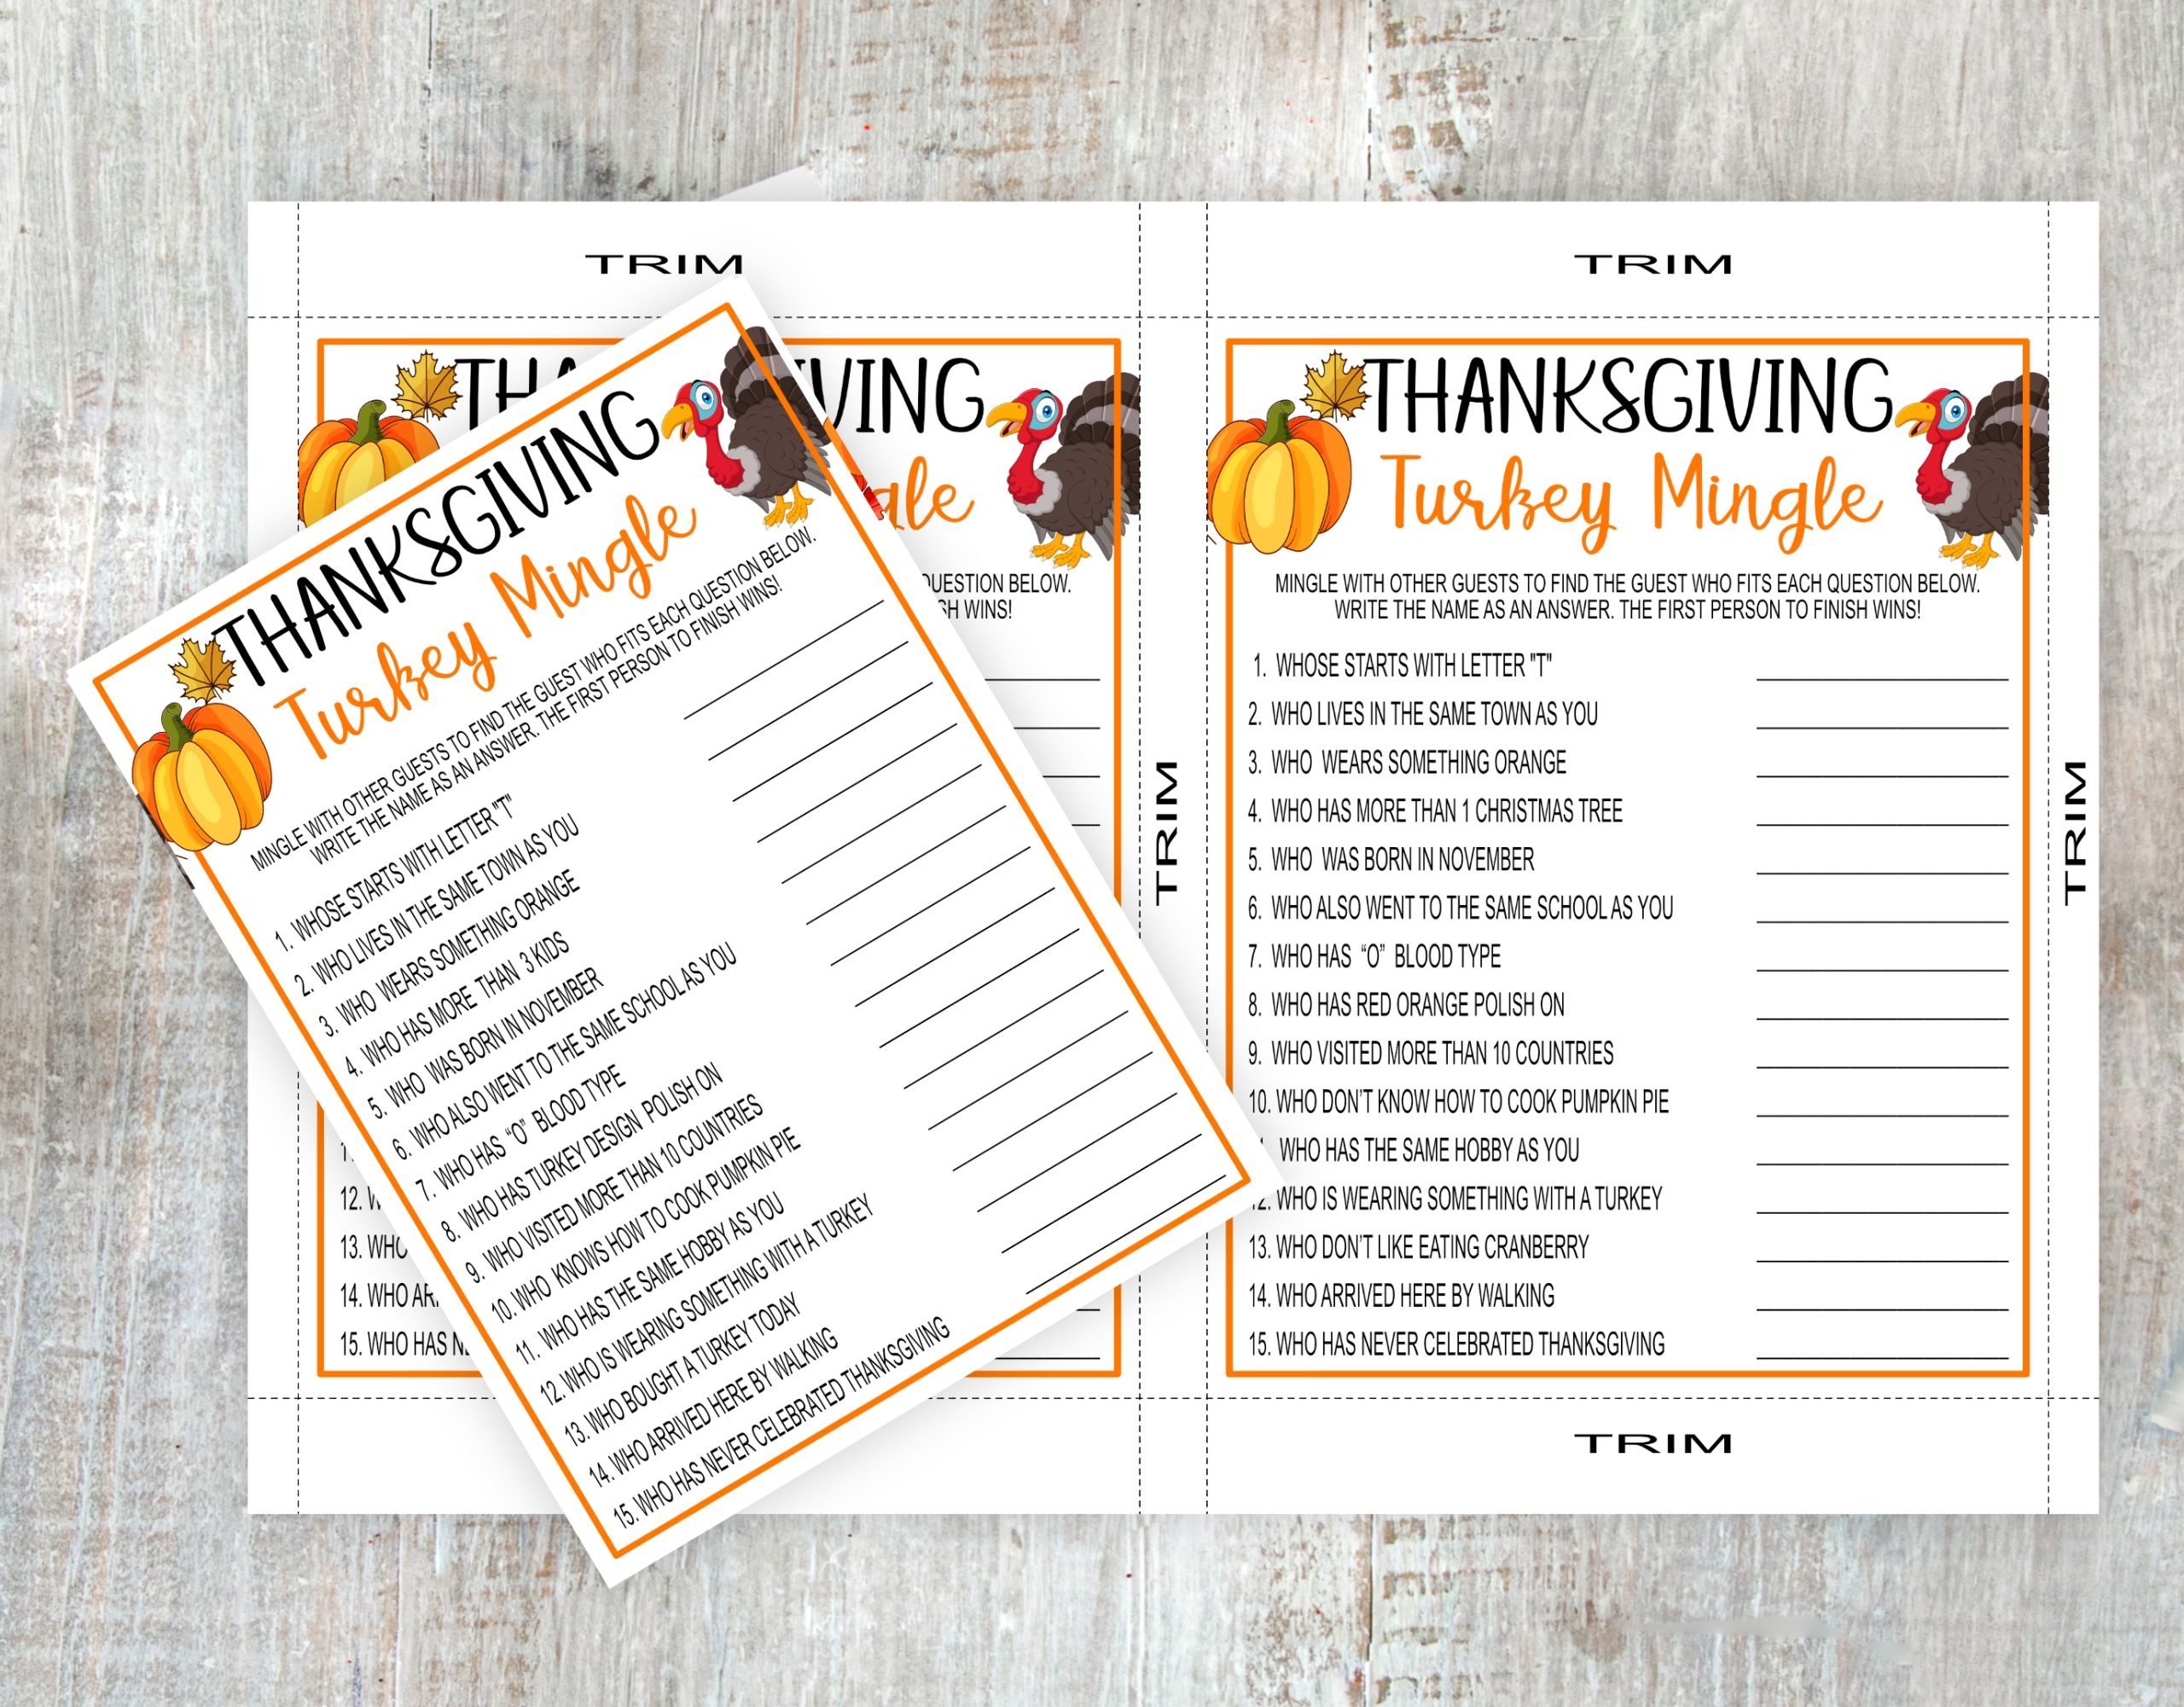 HOLIDAY Thanksgiving Turkey Mingle Printable Thanksgiving Game, Find the Guest, Turkey Day, Fun Game, Thanksgiving party Game for Adults Family_Fun_Game